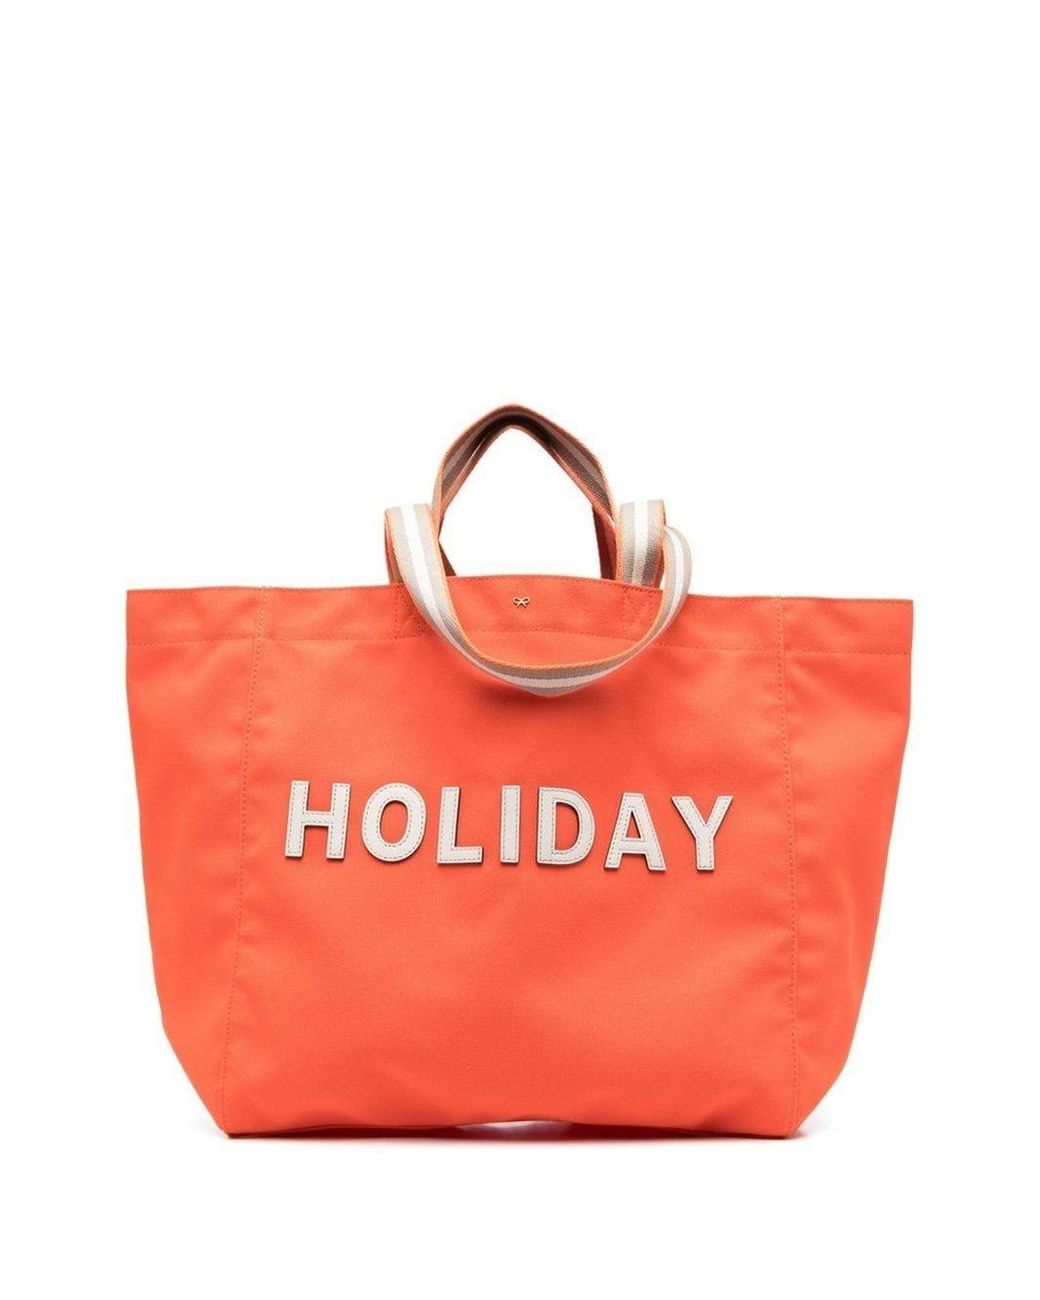 Anya Hindmarch Holiday Recycled Canvas Tote Bag in Orange | Lyst